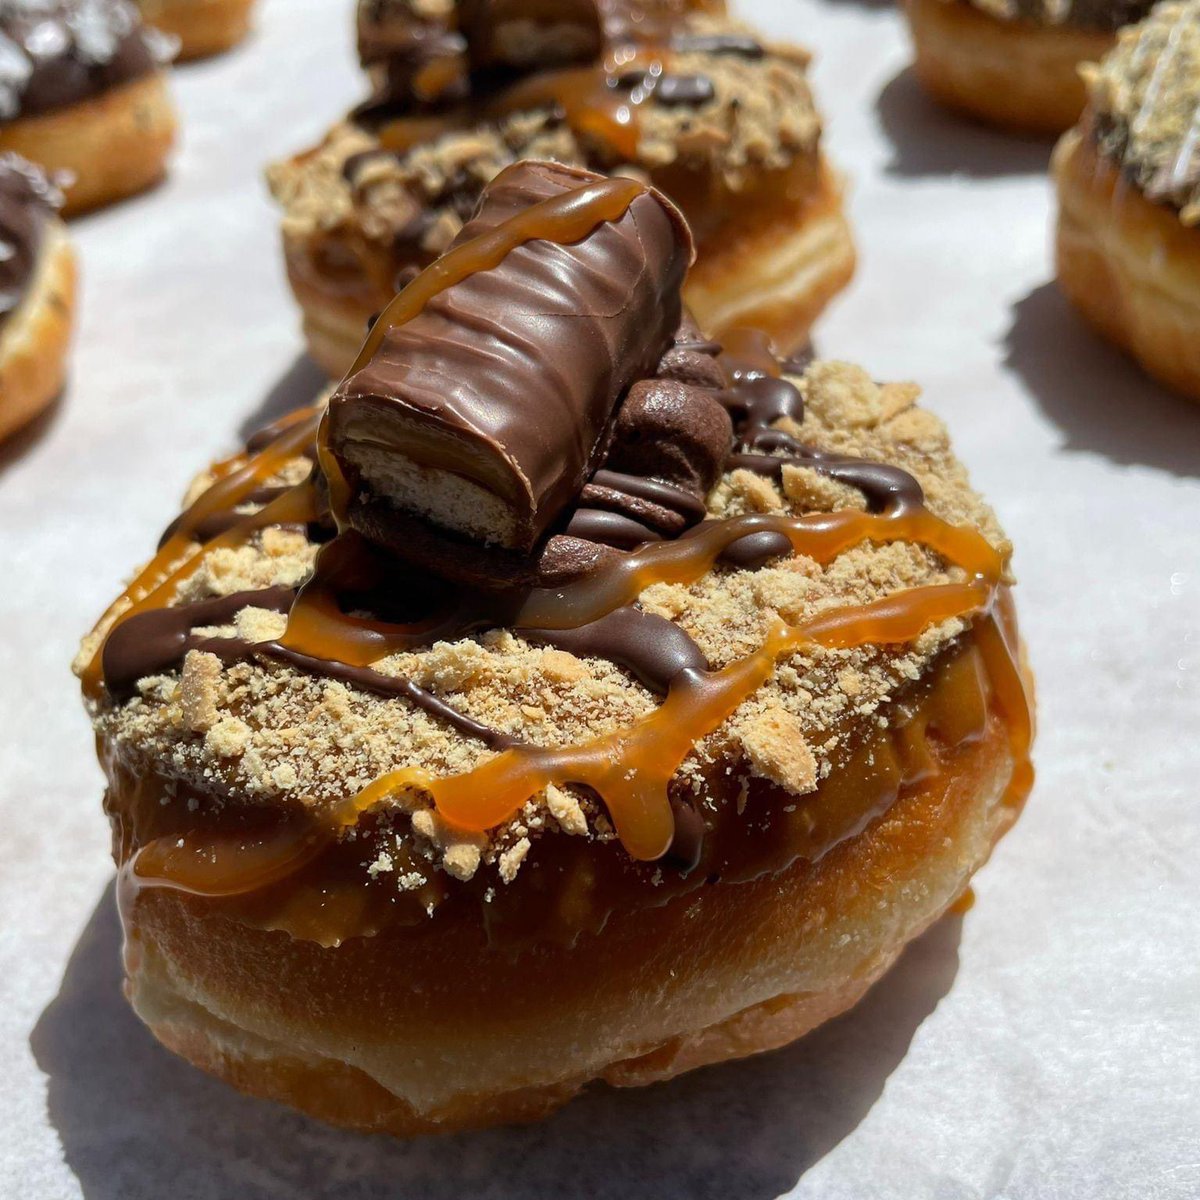 You DOUGHNUT want to miss this! Kick off the long weekend with a trip to the bakery and treat yourself to our Caramel and chocolate doughnut topped with Twix. #summerofdoughnuts #doughnuts #donut #twix